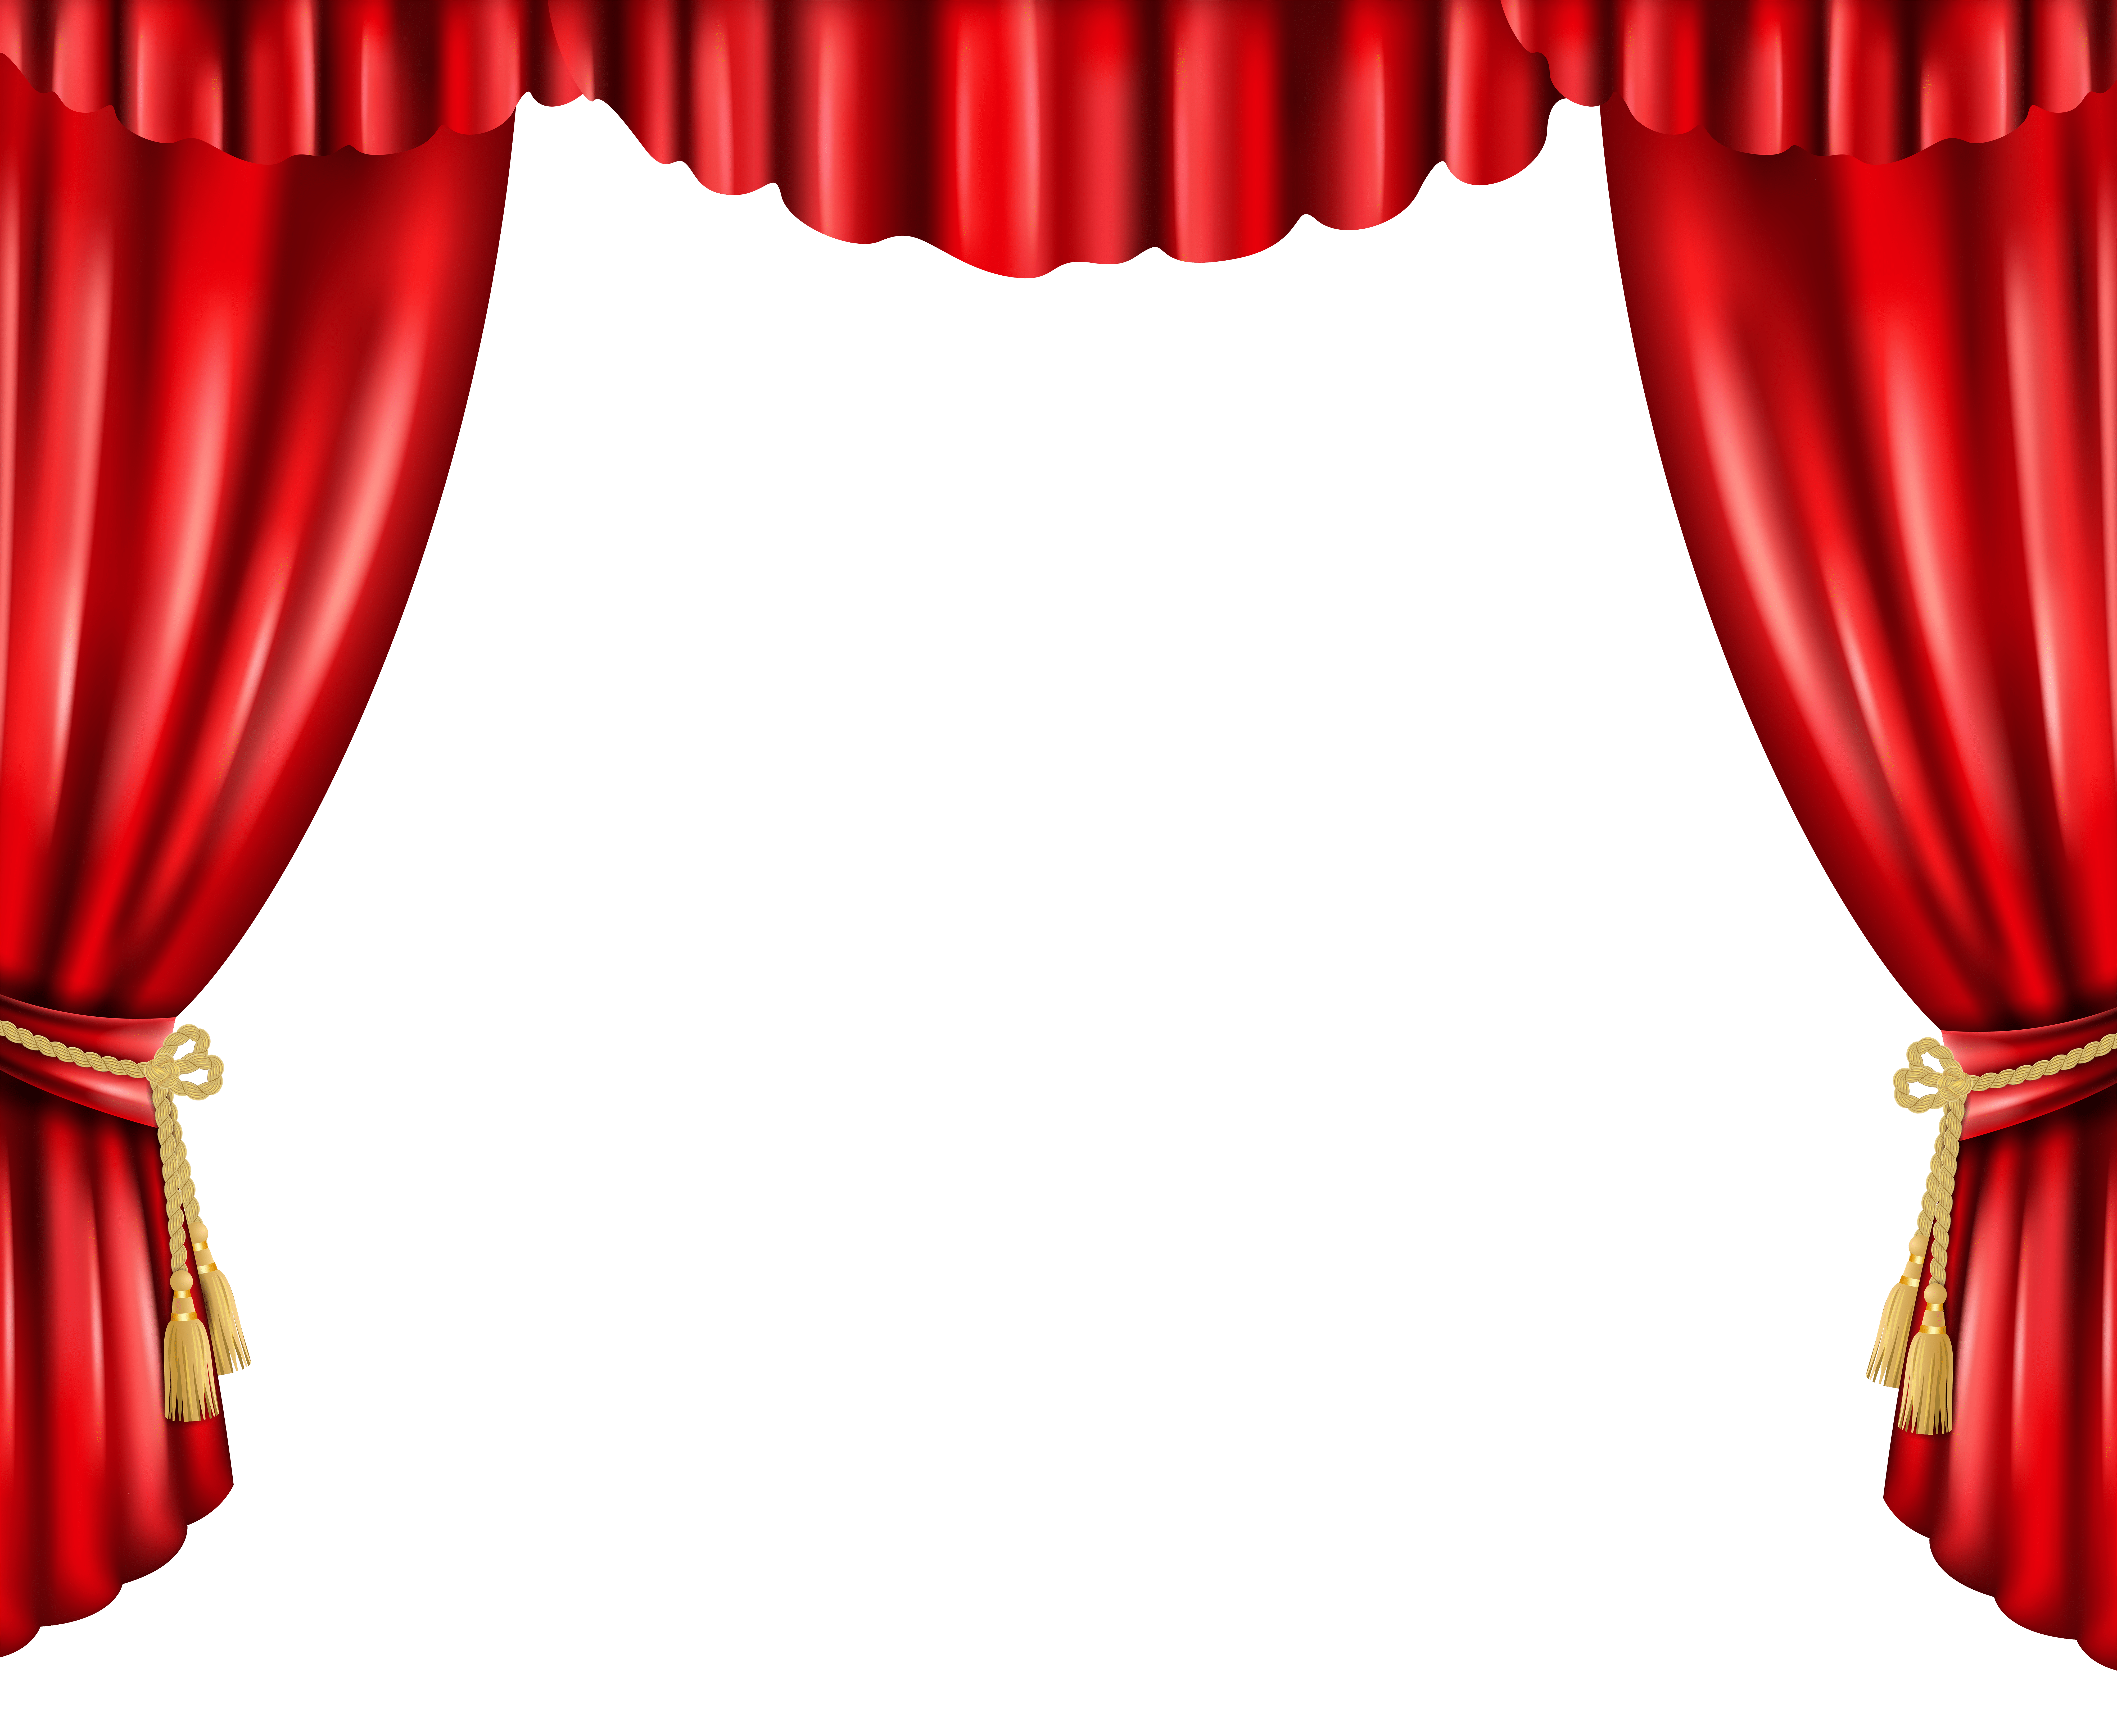 Curtains clipart real. Red theater images gallery